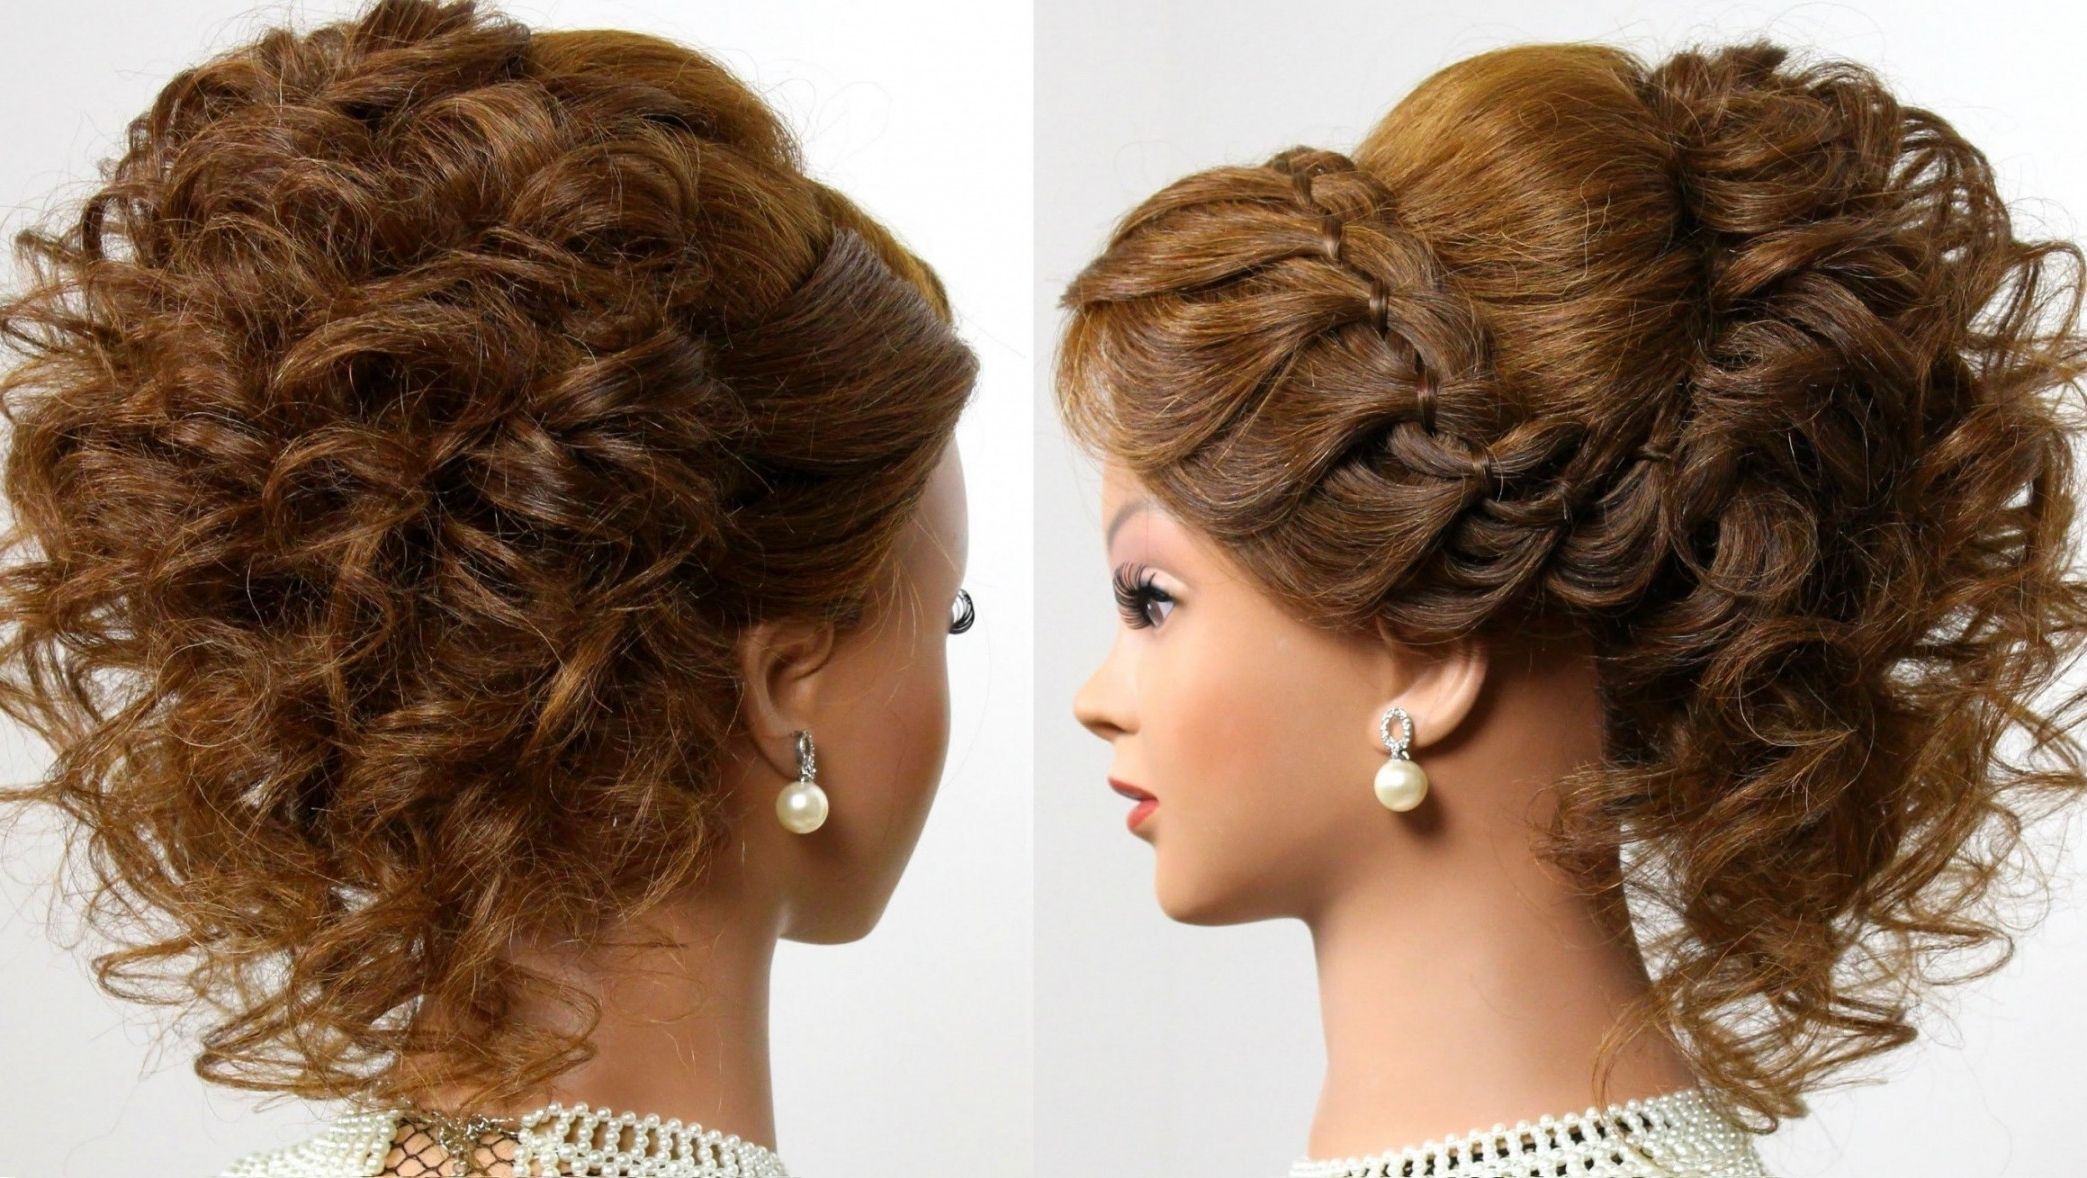 Hairstyles: Wedding Hairstyles Updos | Curly Hair Updos | Updo Throughout Long Hair Updo Hairstyles For Wedding (View 15 of 15)